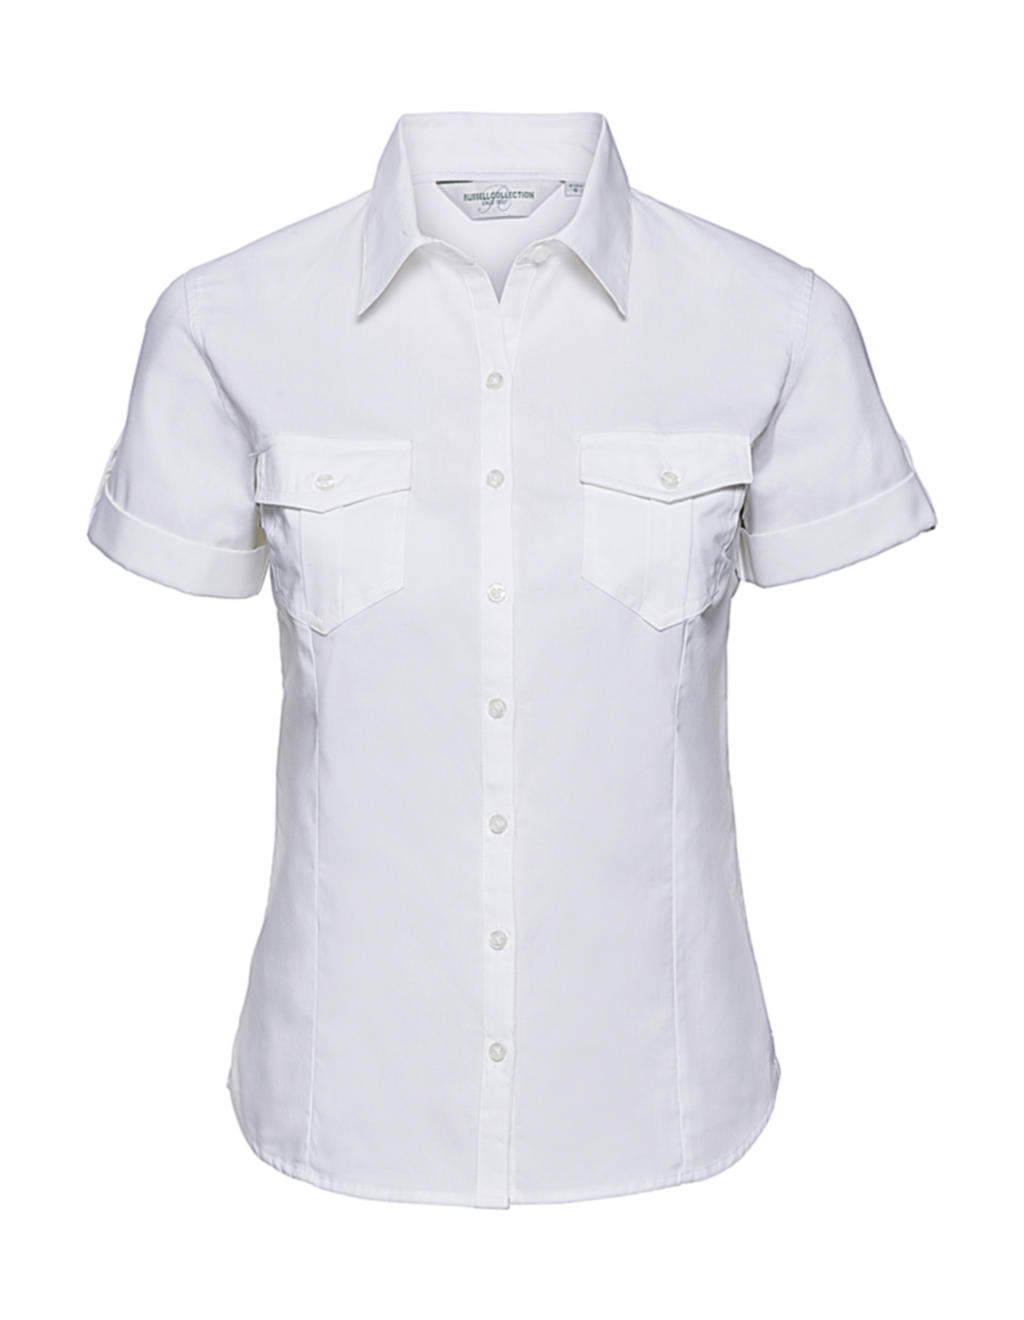  Ladies Roll Sleeve Shirt in Farbe White